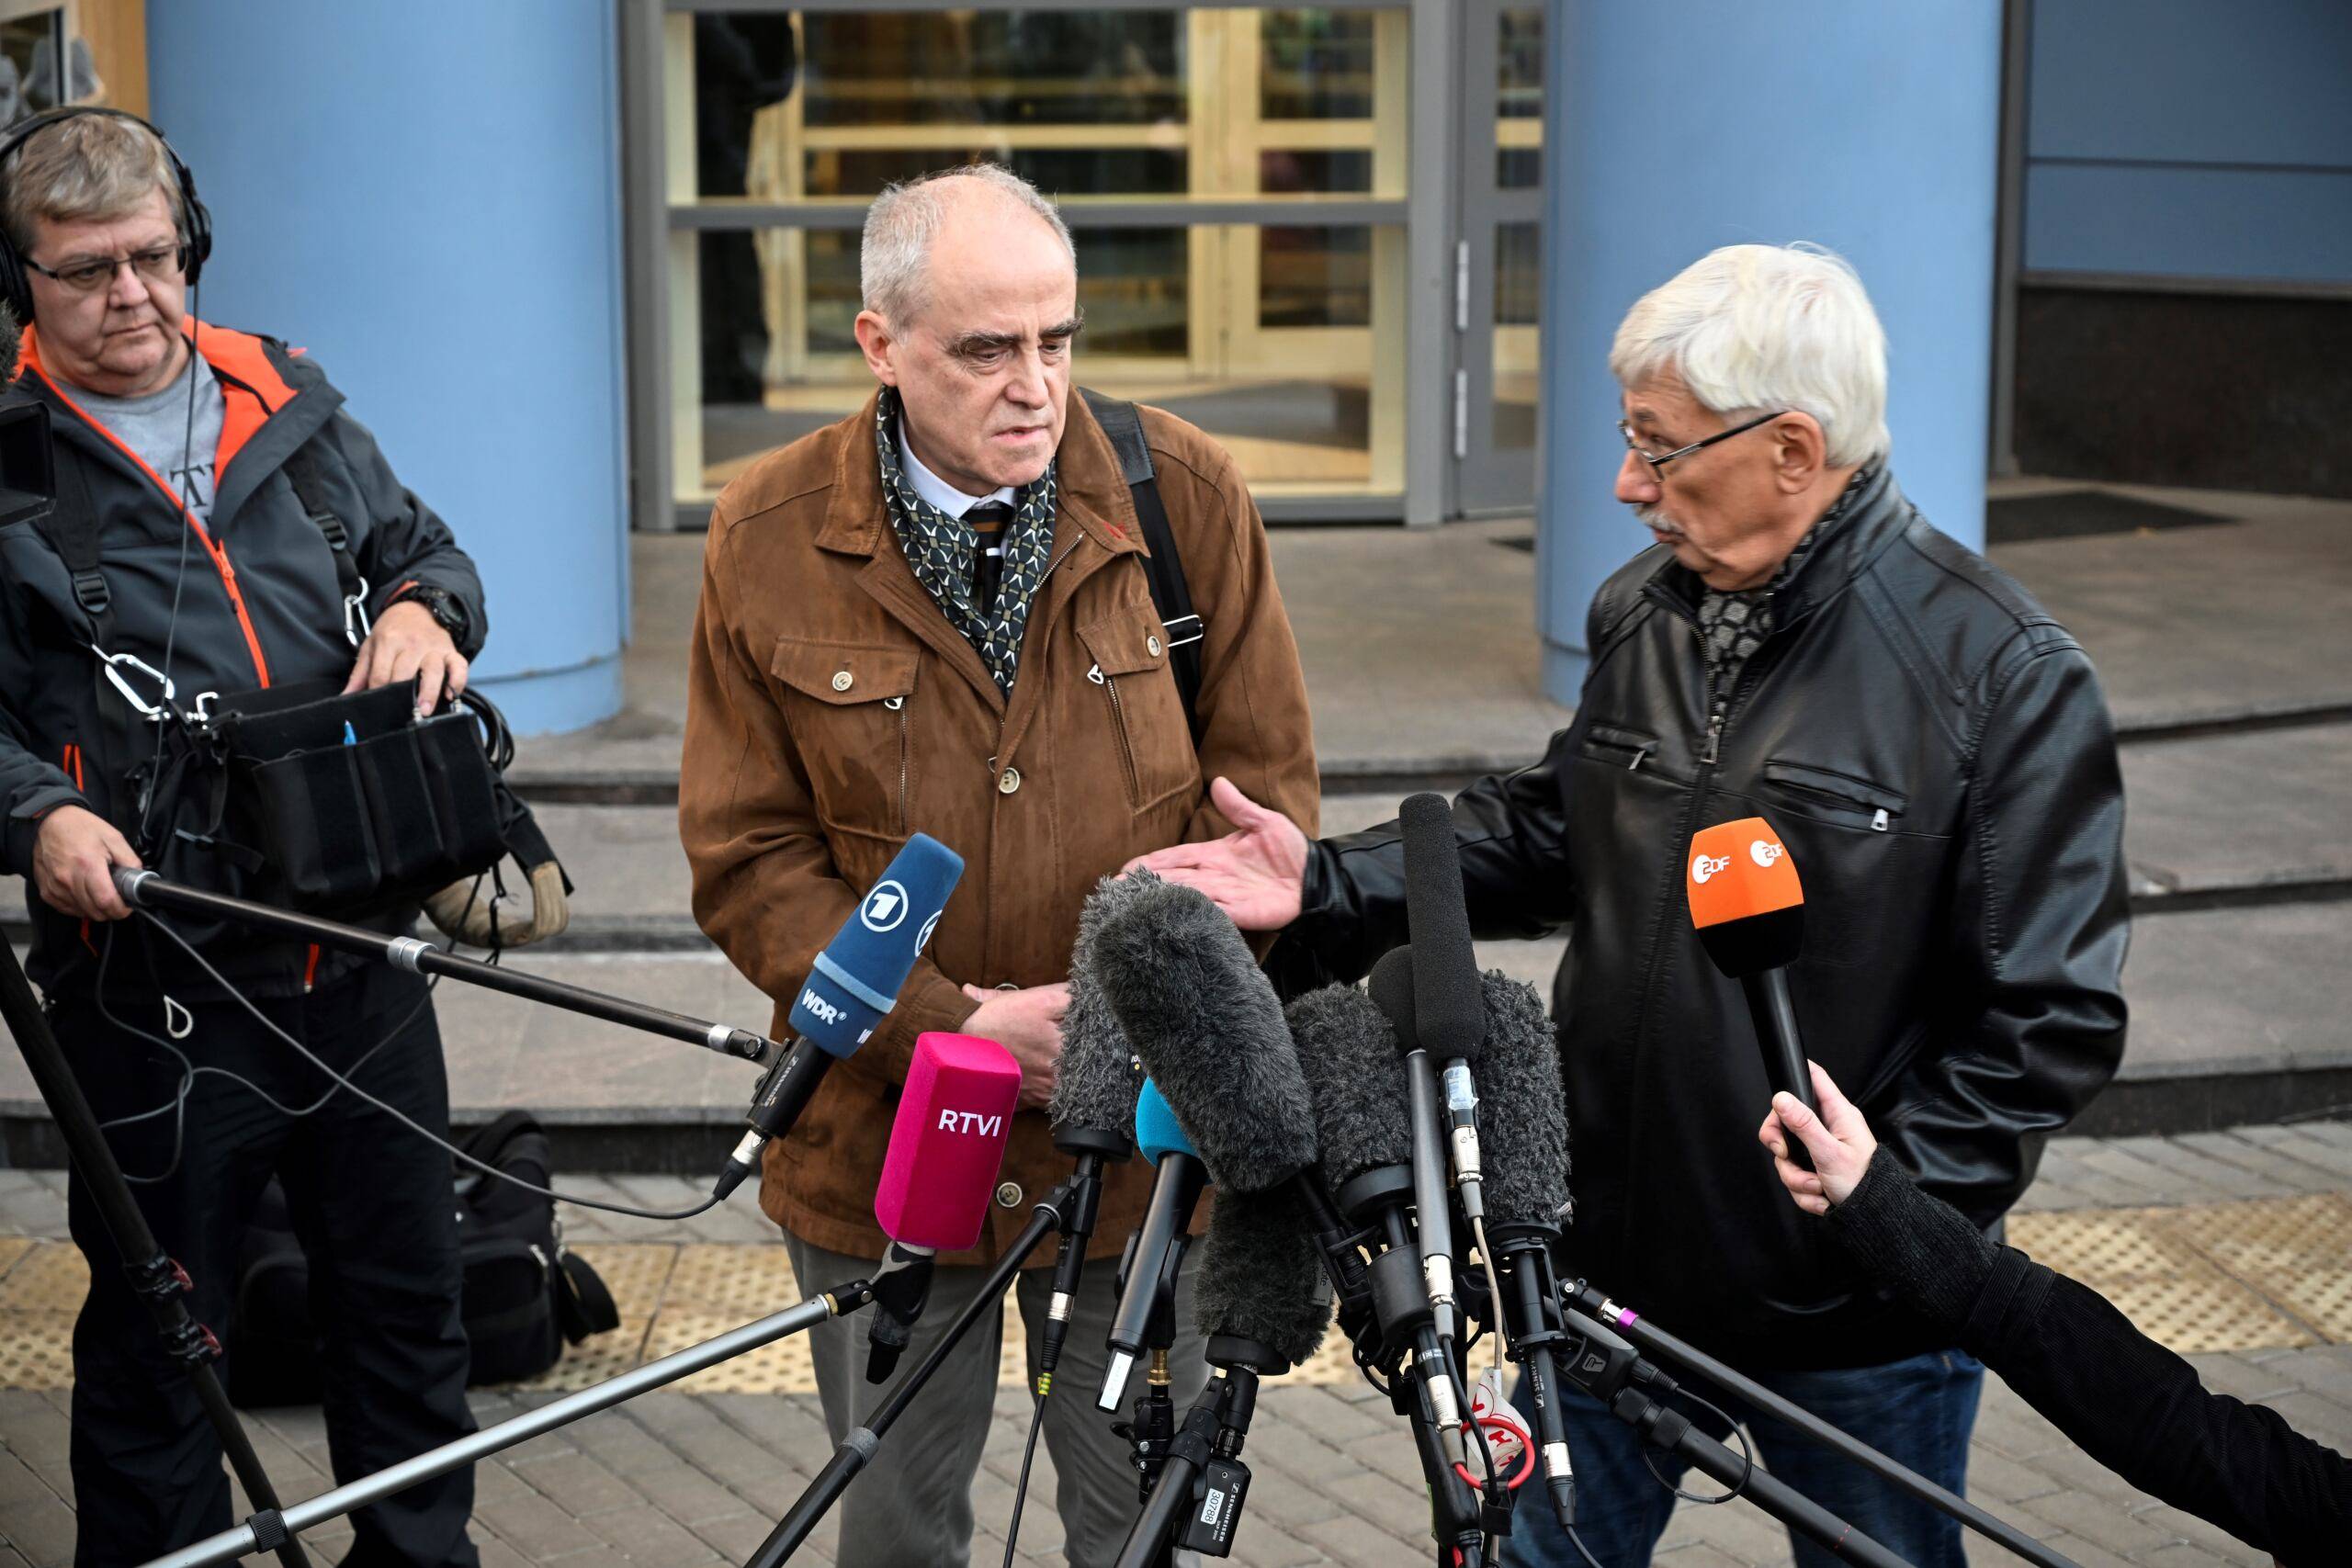 (center L-R) Yan Rachinsky, one of the founders of Memorial rights group, and Oleg Orlov, one of Memorial leading activists, meet with the media after the group was co-awarded the 2022 Nobel Peace Prize along with Belarus' human rights advocate Ales Bialiatski and the Ukrainian human rights organisation Center for Civil Liberties, in Moscow on October 7, 2022. (Photo by Alexander NEMENOV / AFP)